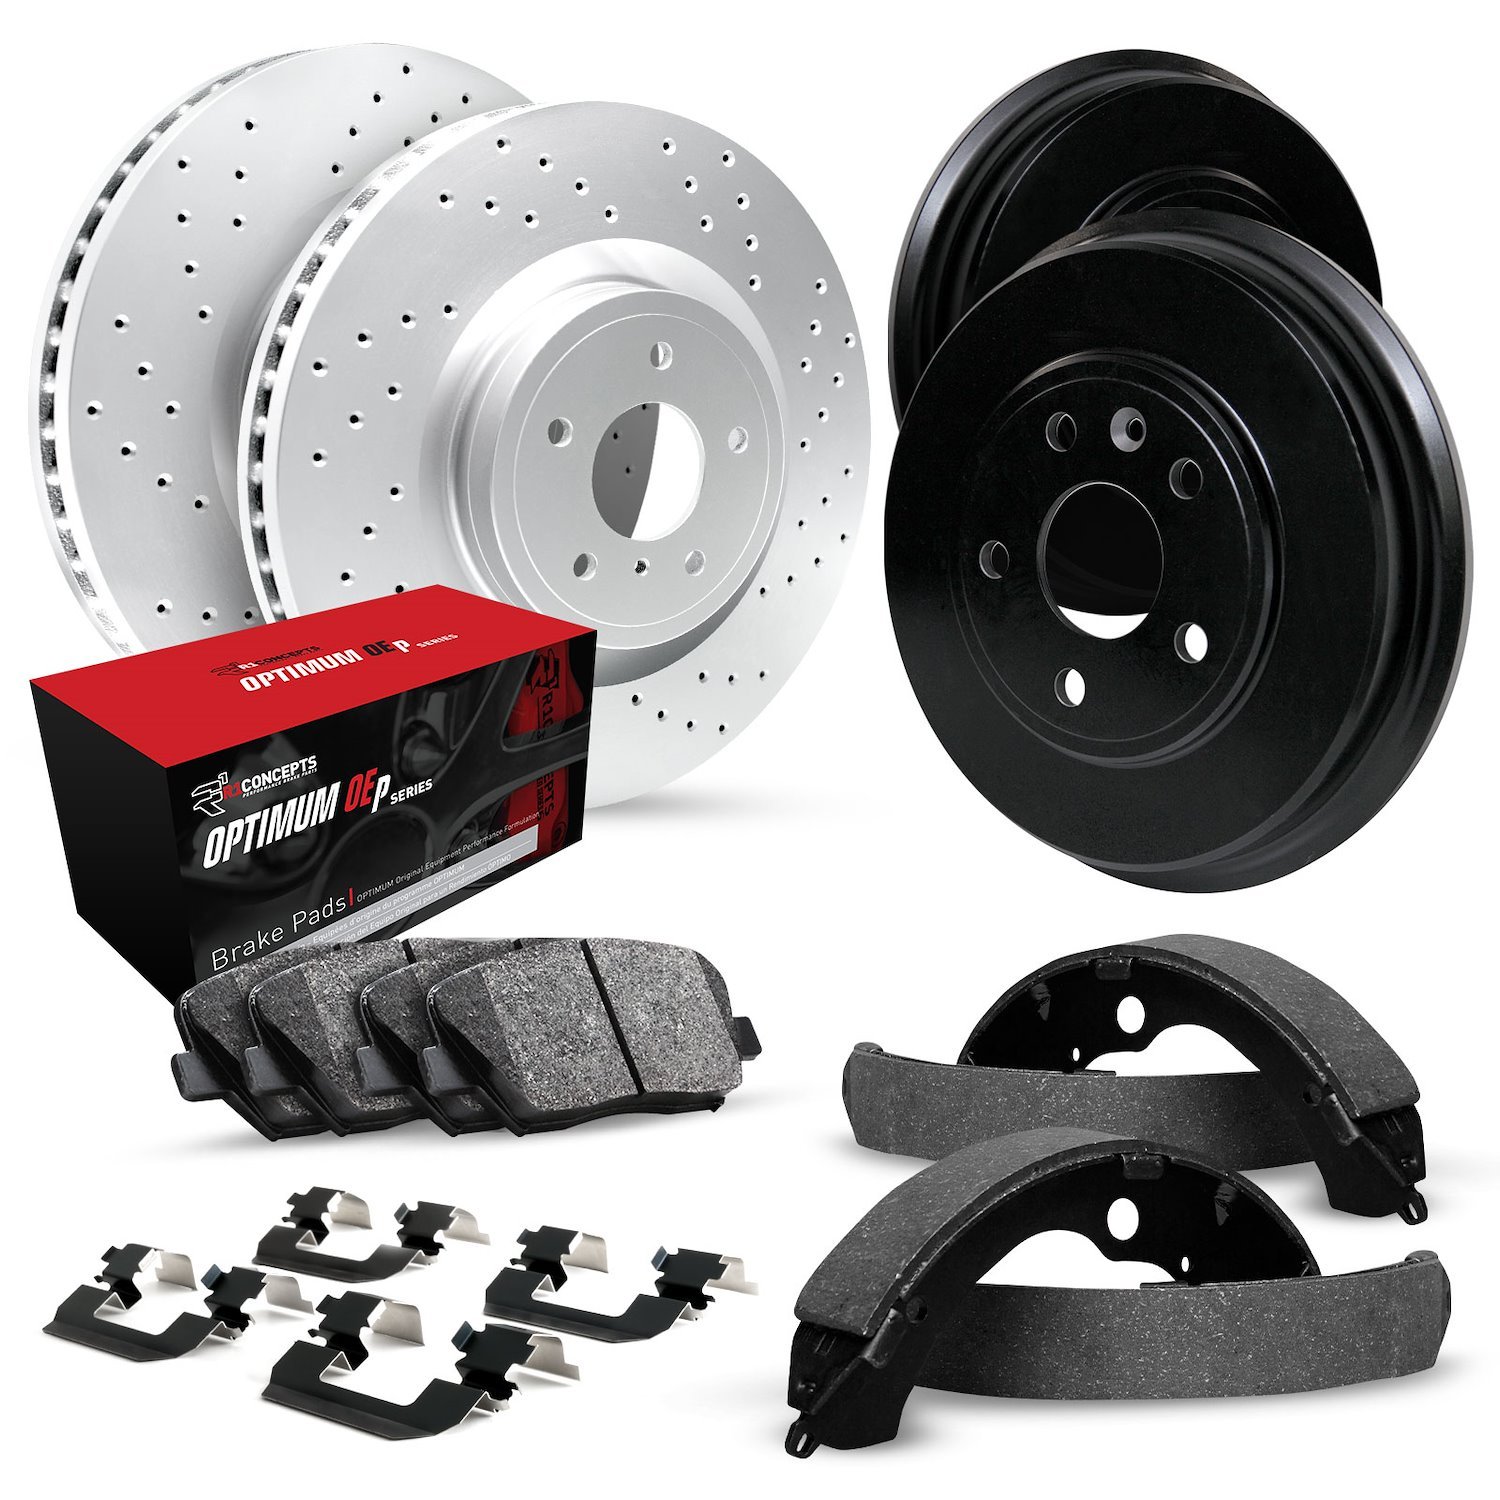 GEO-Carbon Drilled Brake Rotor & Drum Set w/Optimum OE Pads, Shoes, & Hardware, 1992-1996 GM, Position: Front & Rear